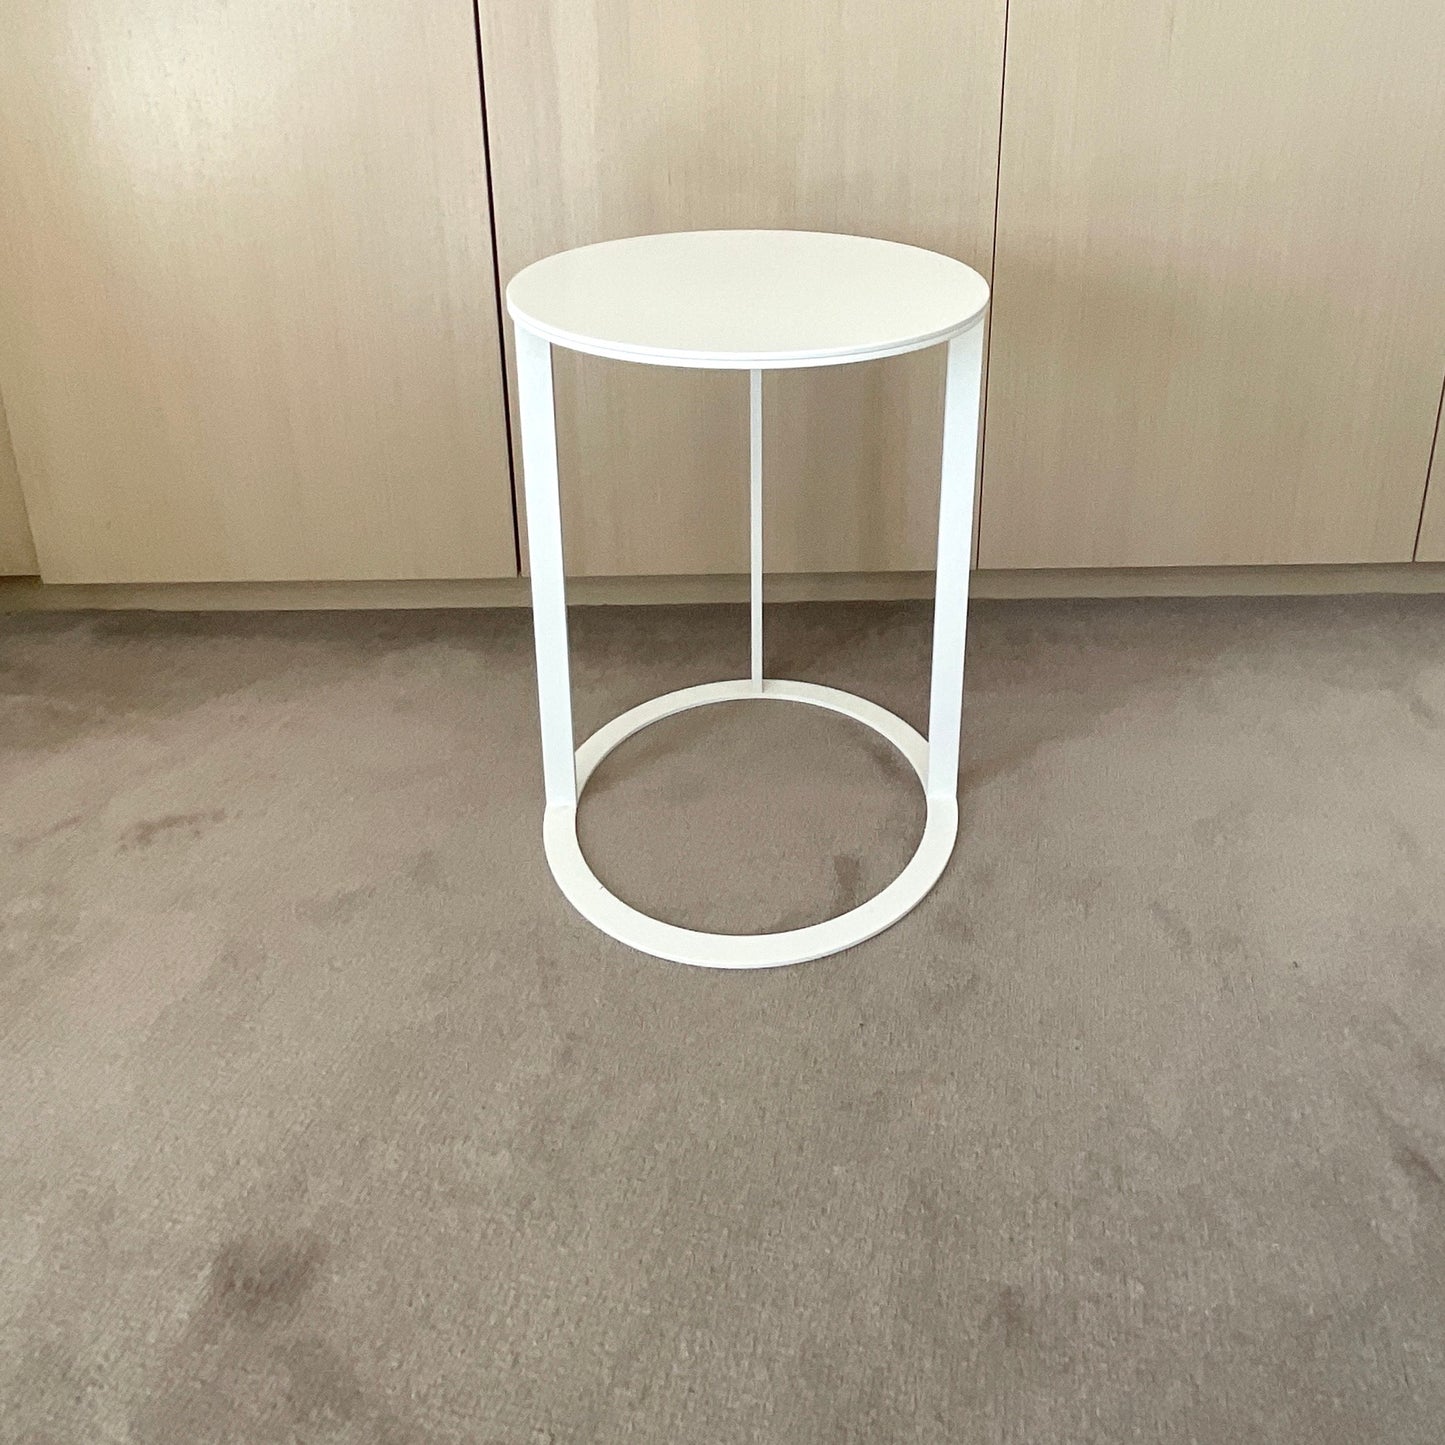 Frank Small Table by Antonio Citterio for B&B Italia (2 available)